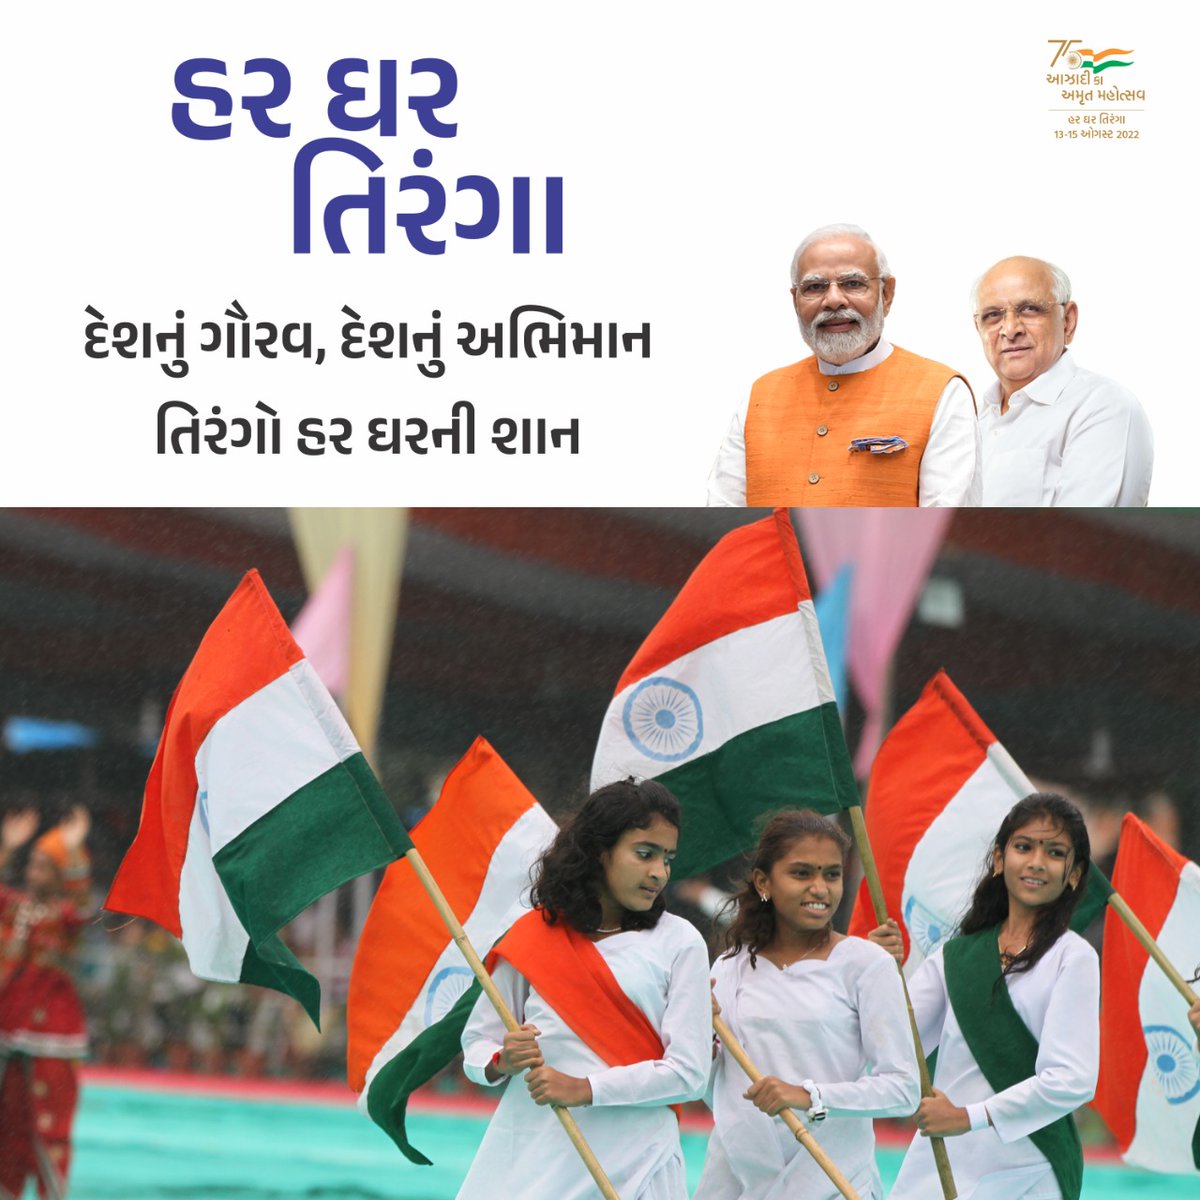 Our flag is a symbol that unites us all. It's a reminder that despite our differences, we are one! As we celebrate 'Azadi Ka Amrit Mahotsav', let's show unity in diversity by flying a #Tiranga at our homes from 13-15 Aug #HarGharTiranga @narendramodi @Bhupendrapbjp @CMOGuj